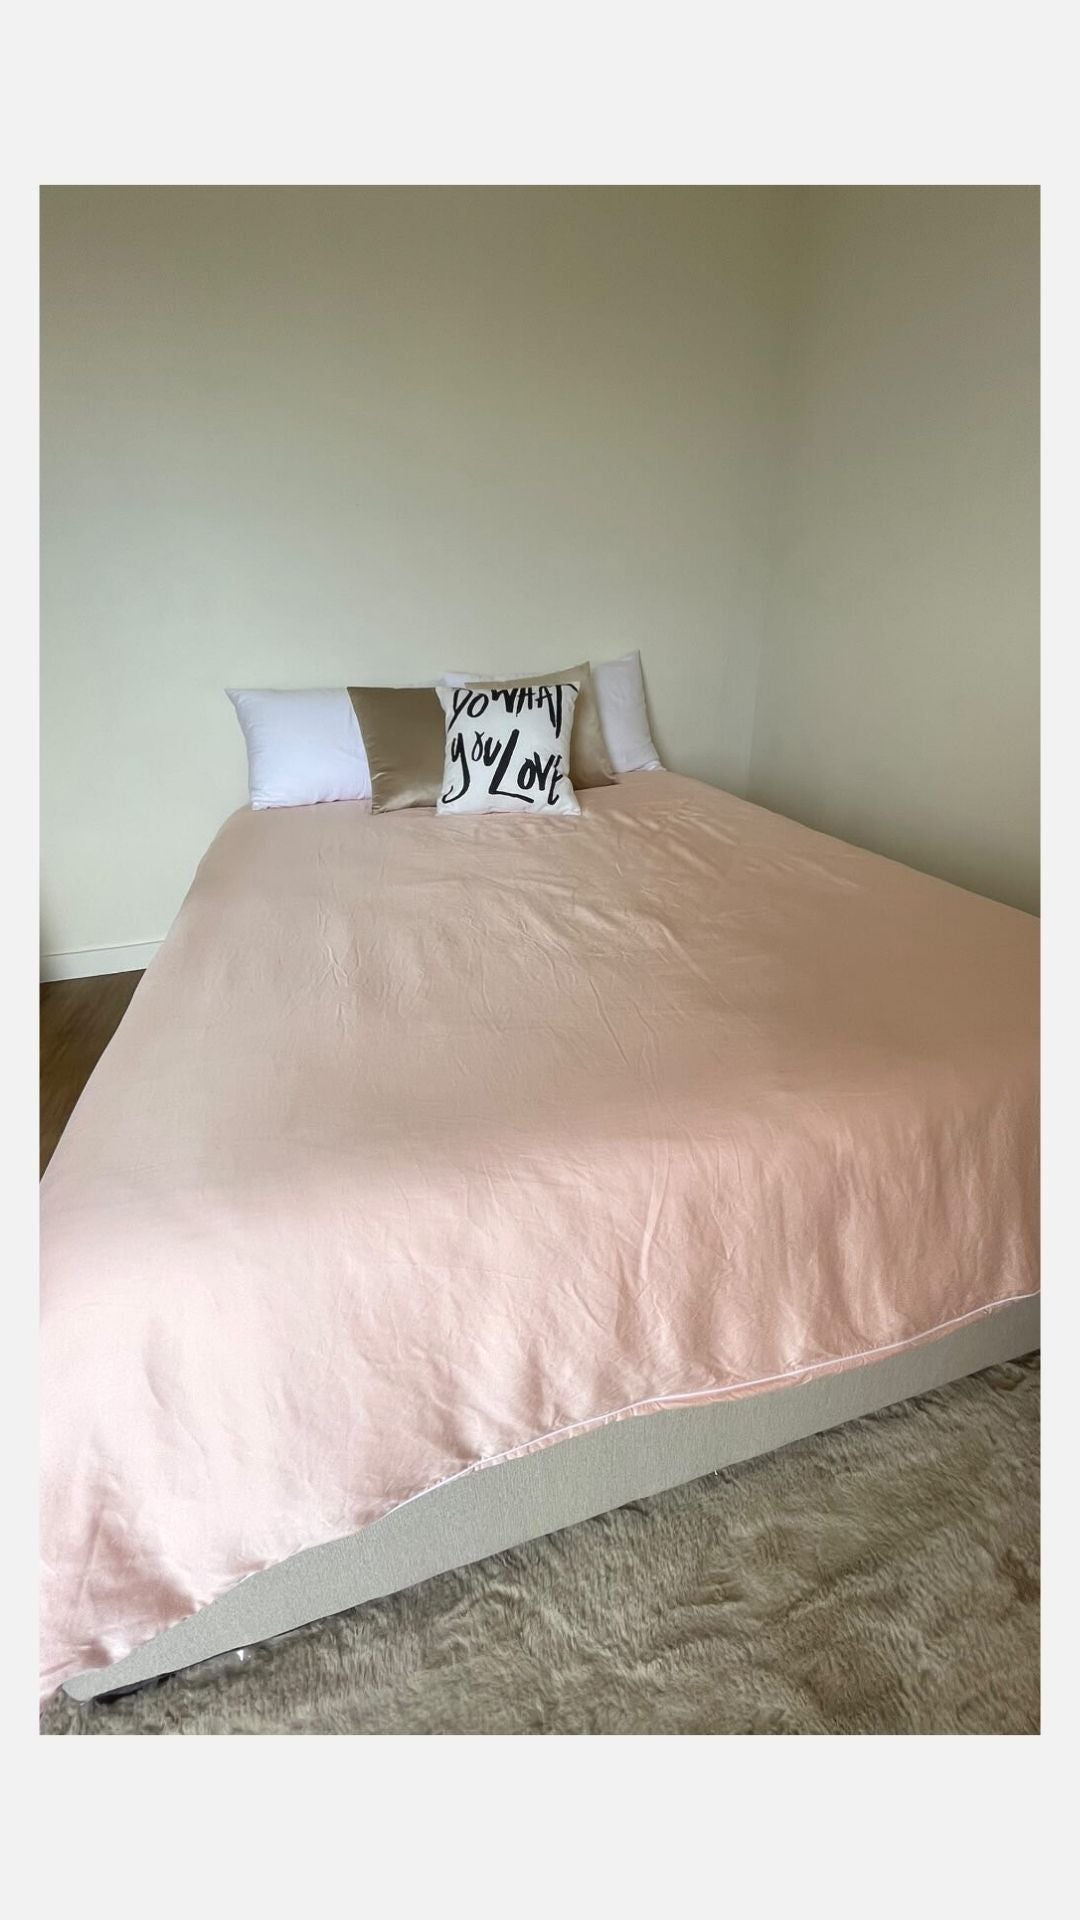 ava and ava ph review - cooling, silky soft organic bamboo lyocell sheet set, pillowcases, duvet cover in blush pink with white piping